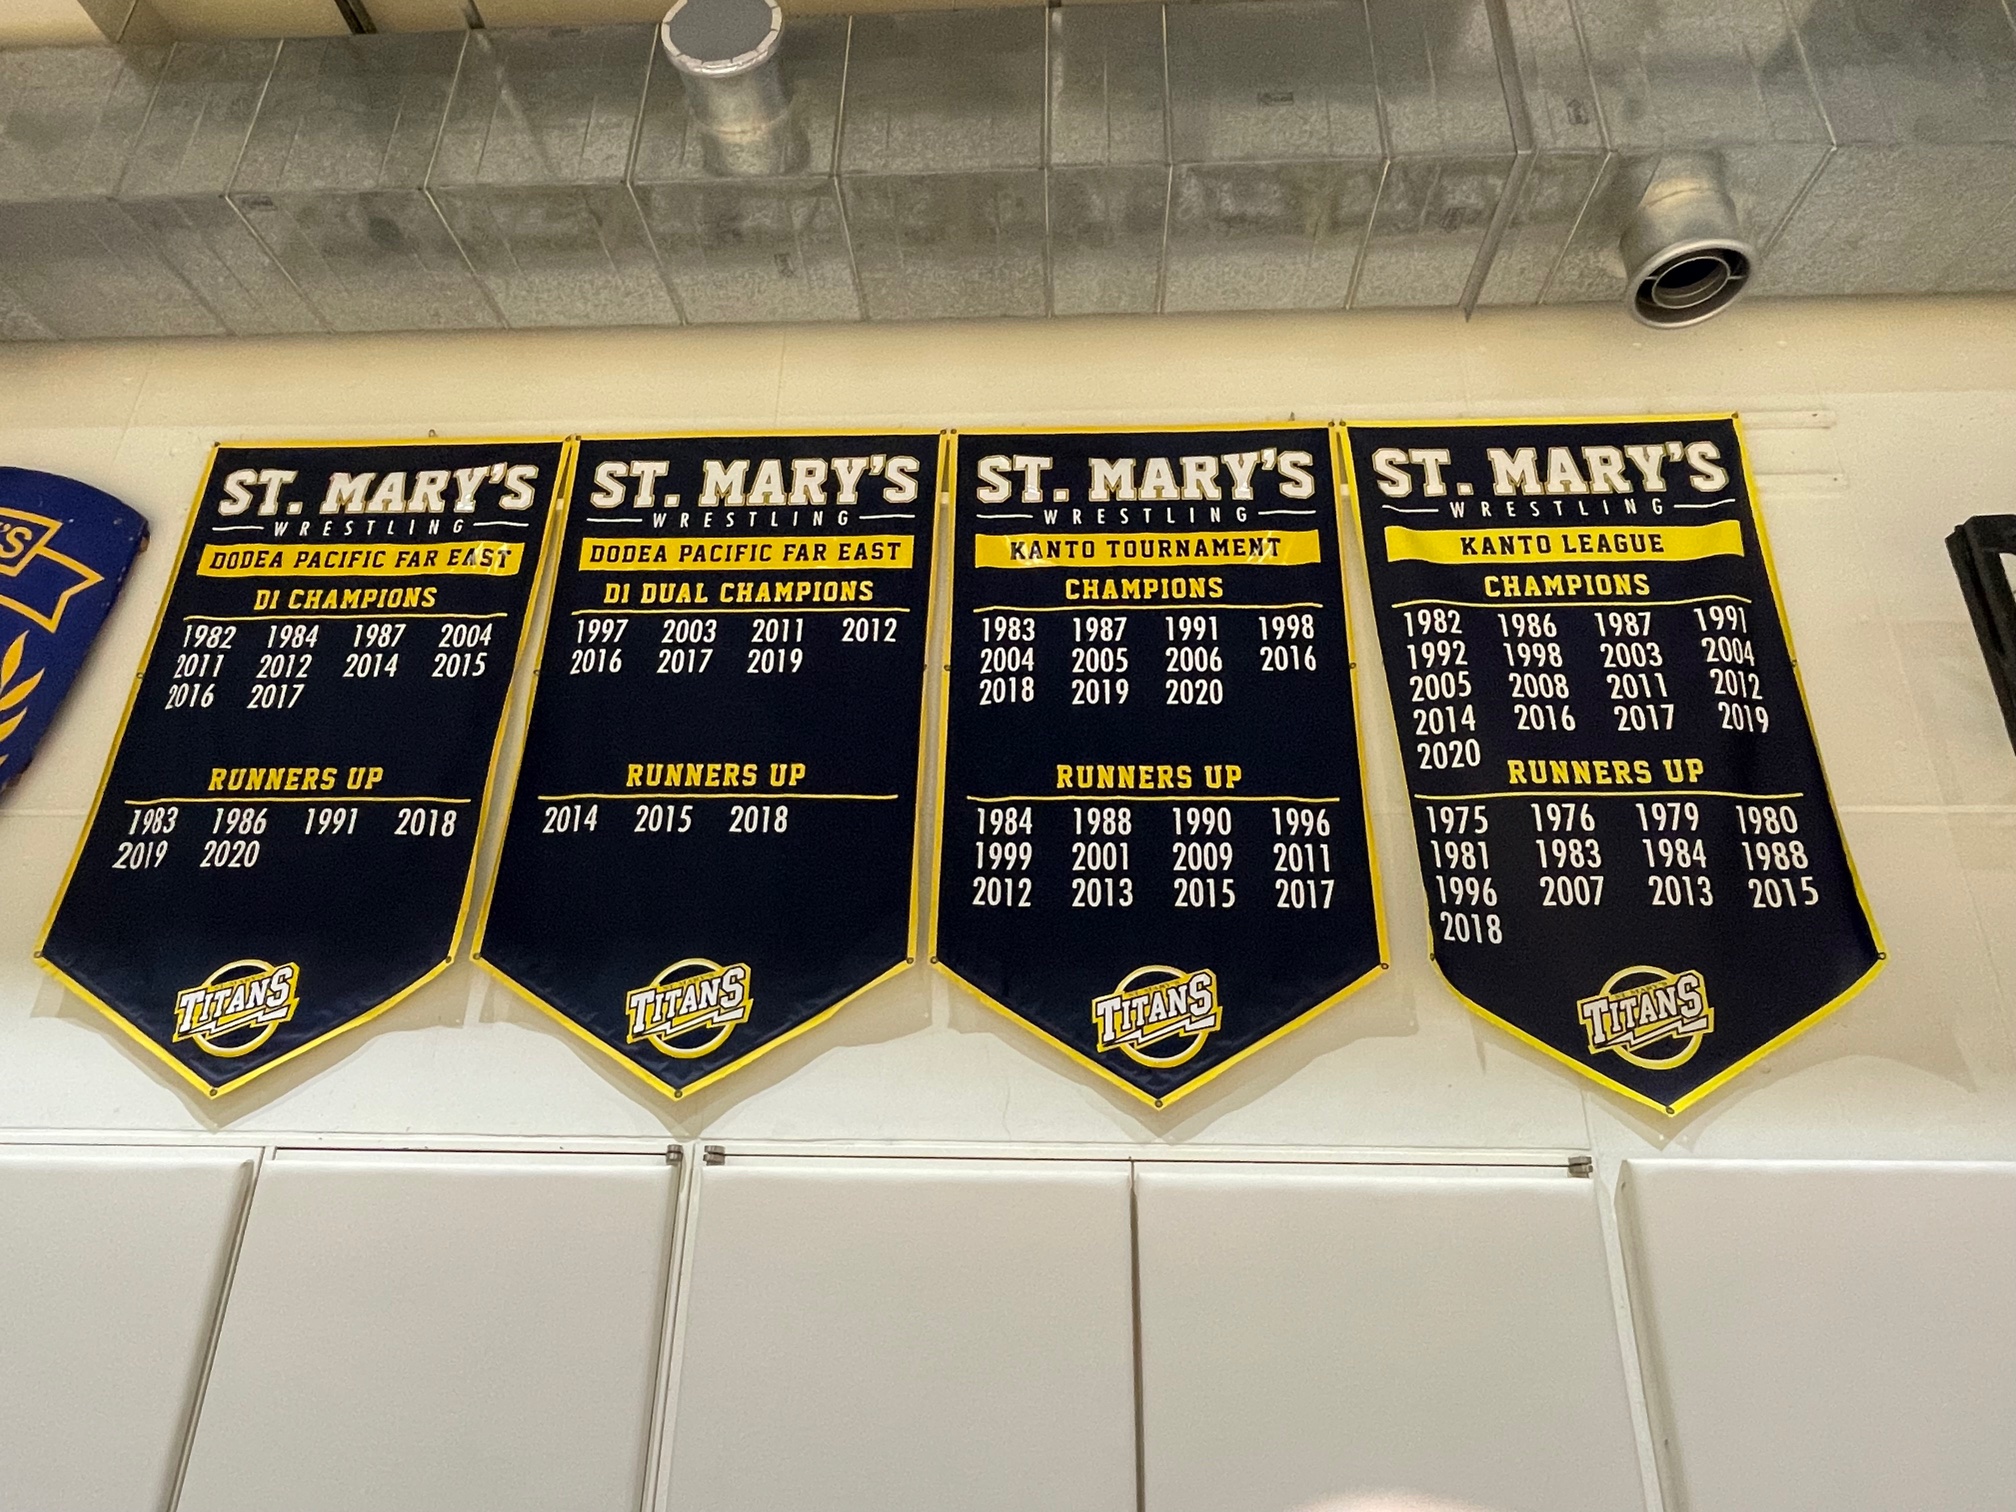 St. Mary's Becomes Most Dominant Team of the Decade